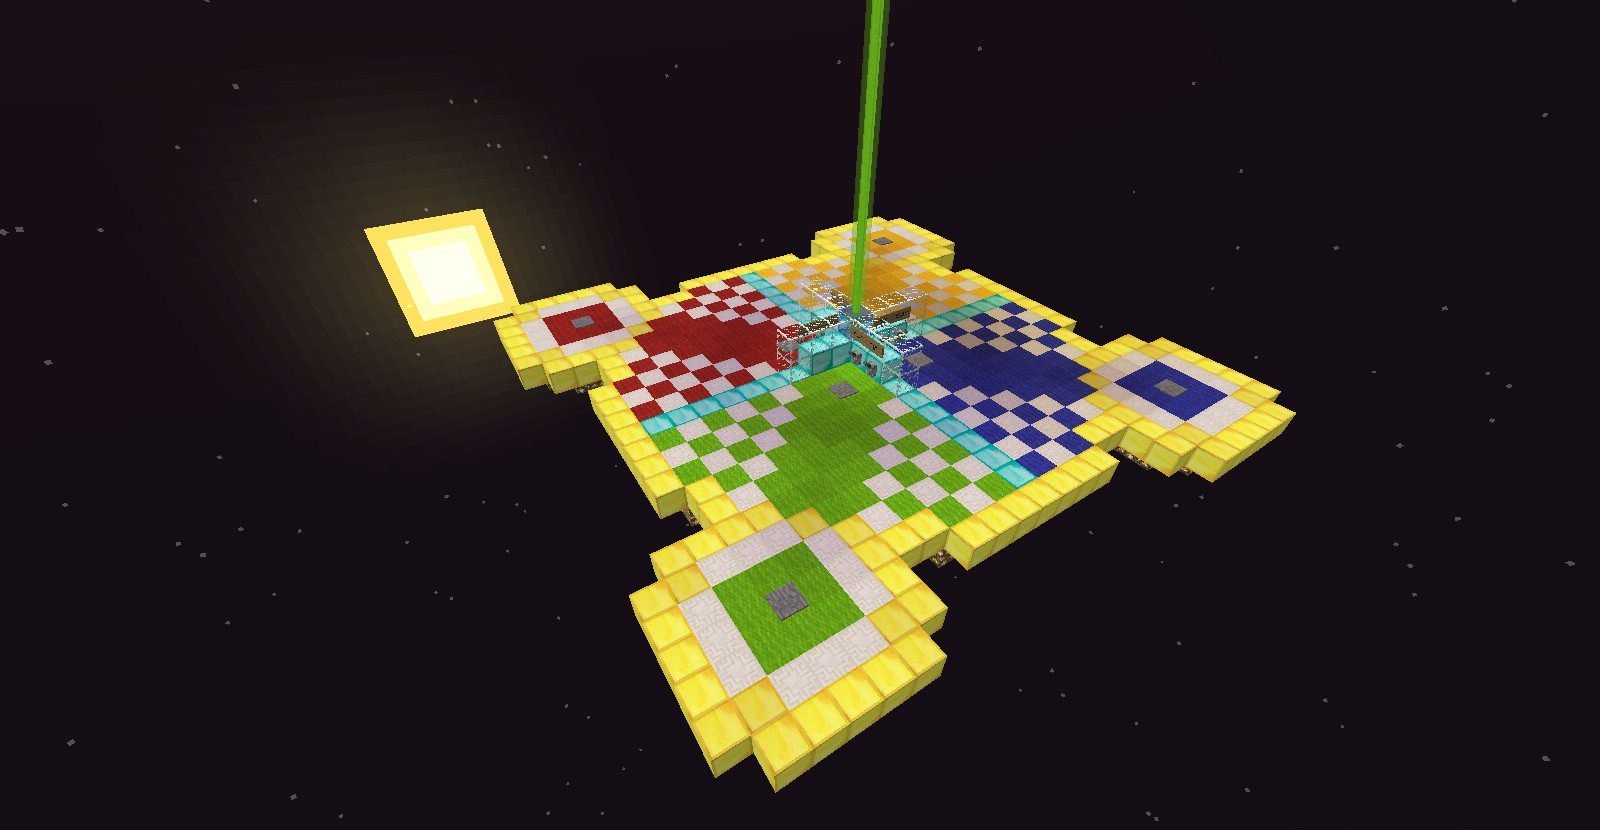 Download Lucky Block Map for Minecraft PE on Android